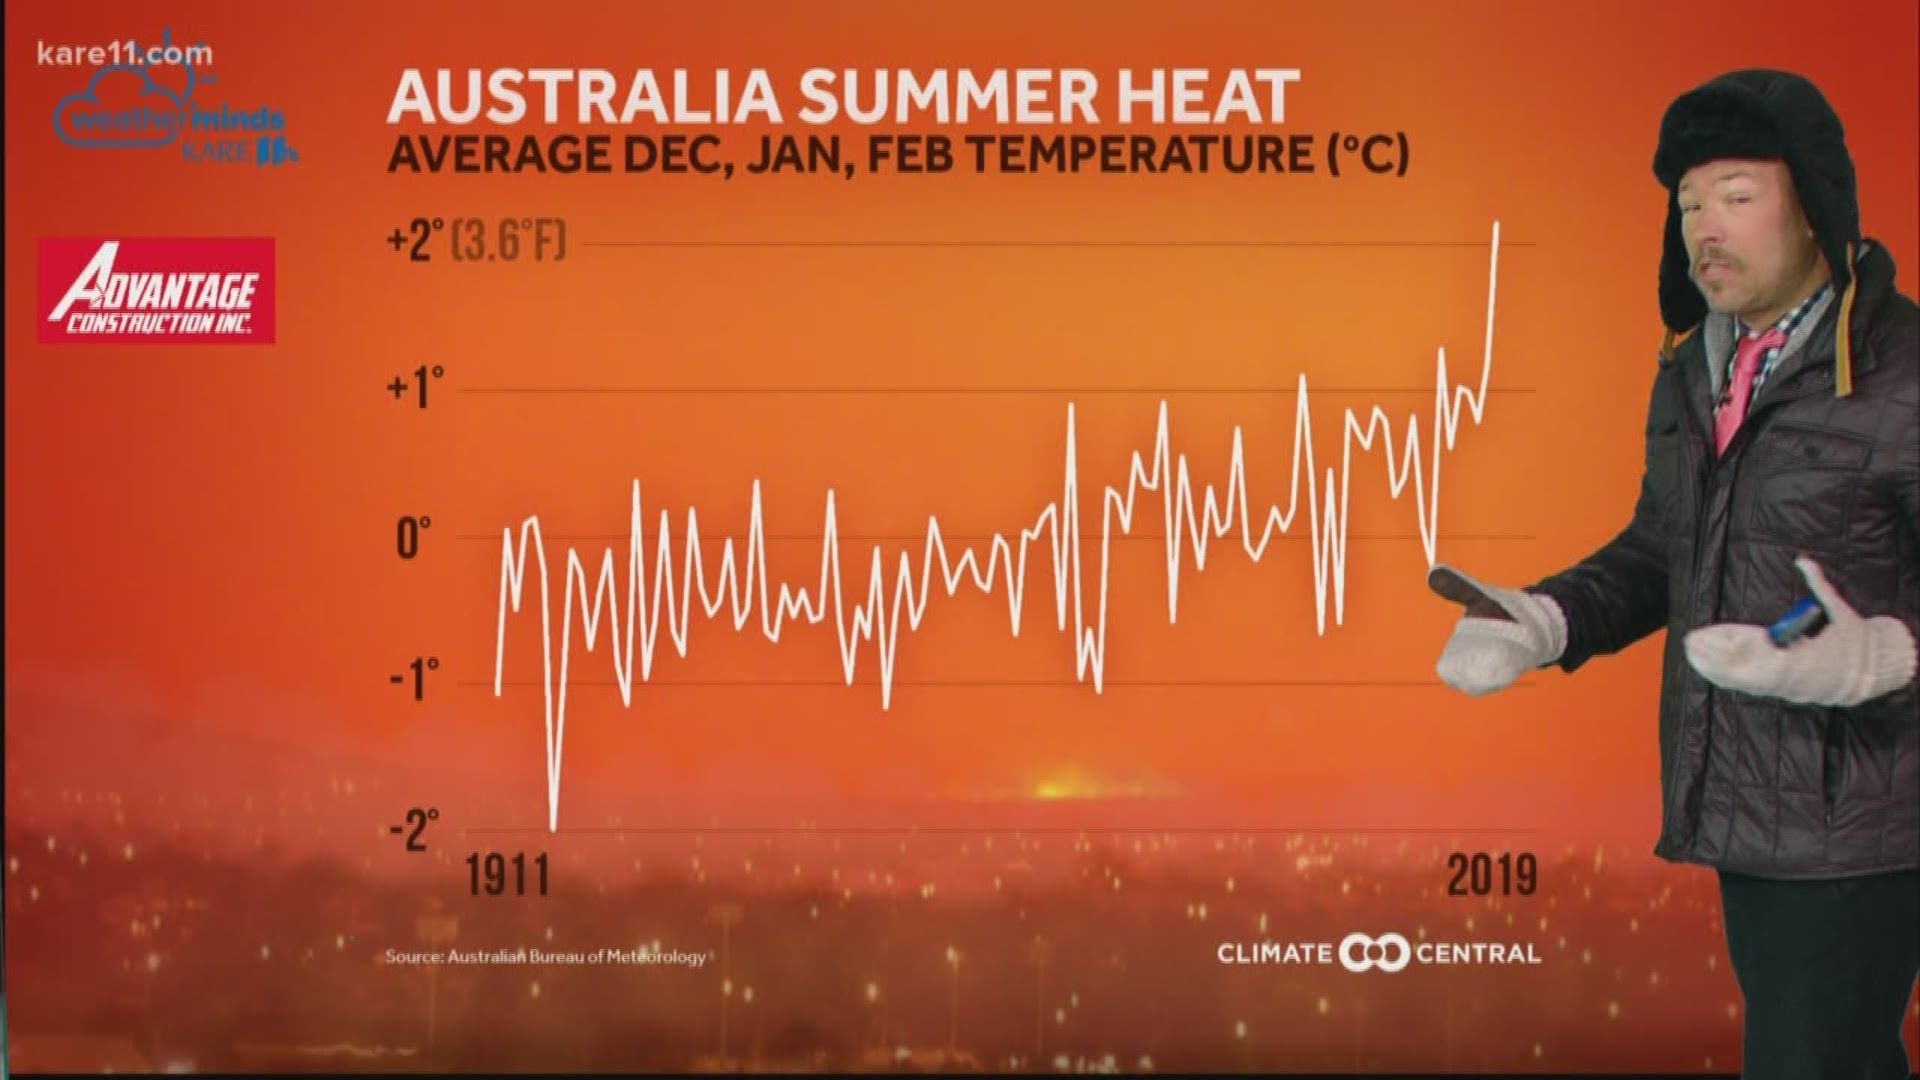 Australia's summer temps are on the rise.